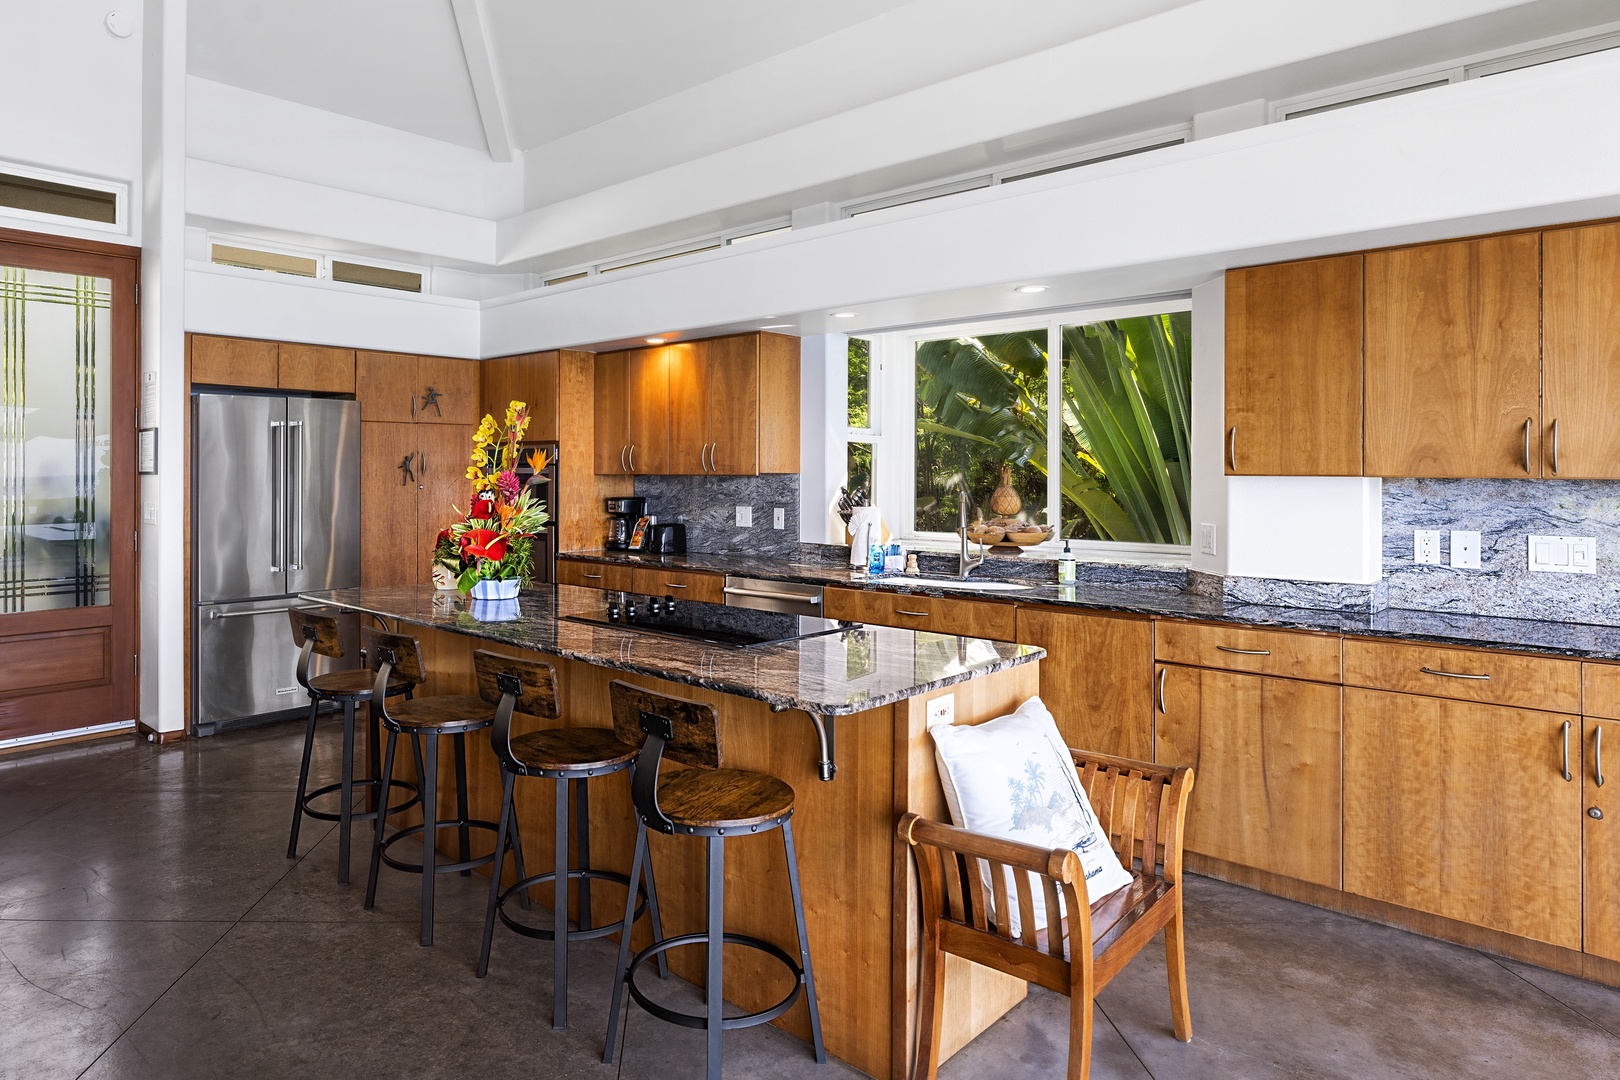 Kailua-Kona Vacation Rentals, Hale Kope Kai - Upgraded fully equipped kitchen ready to cook your favorite meals!